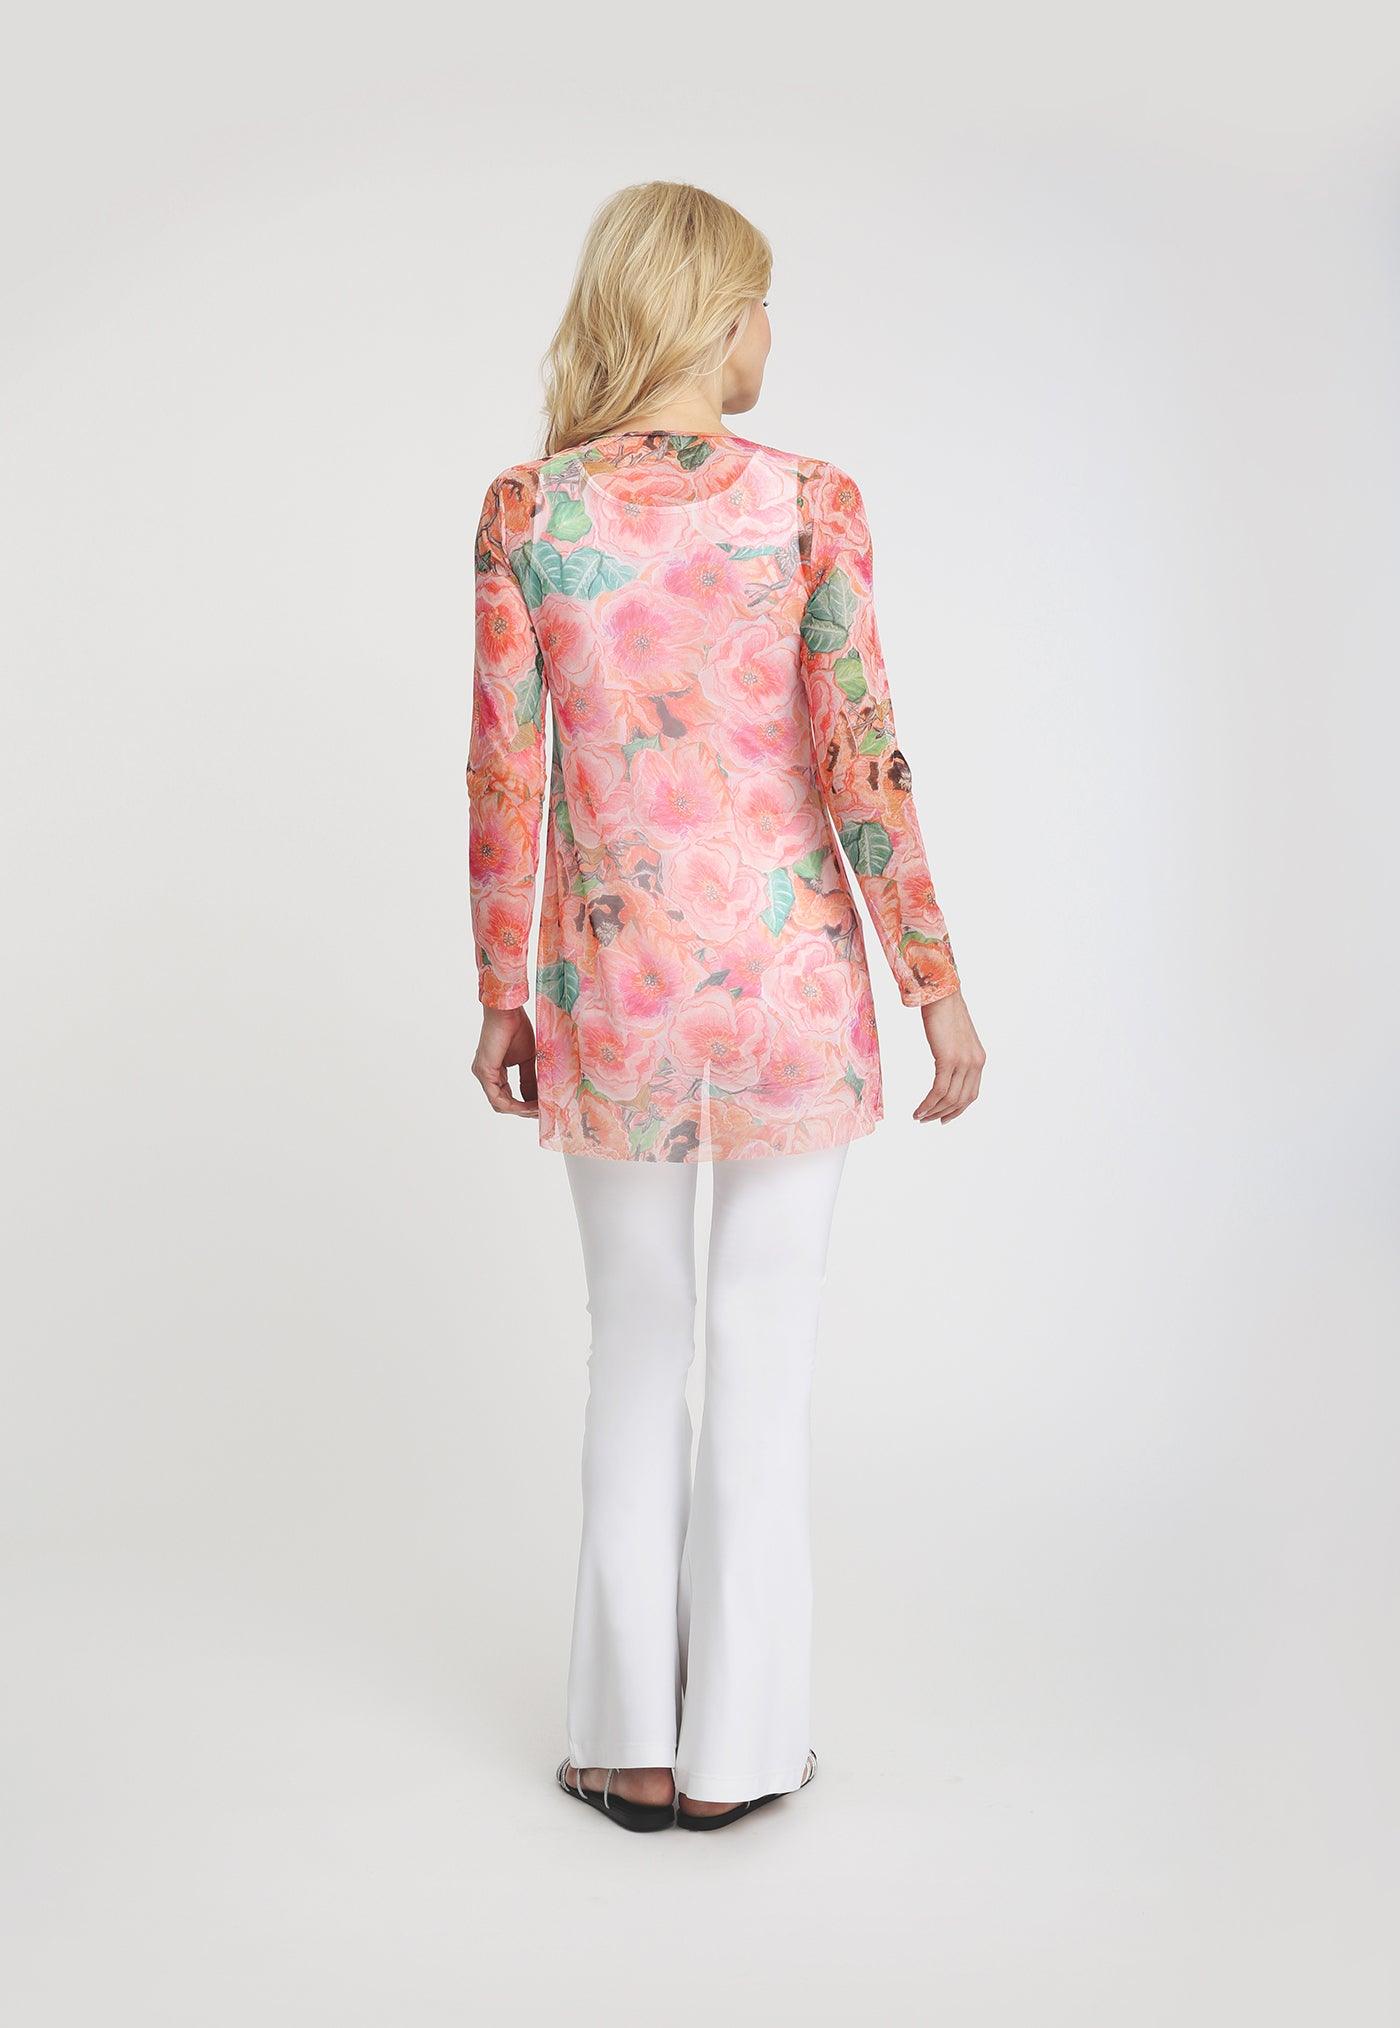 pink and orange flower printed mesh tunic top with white stretch knit pants